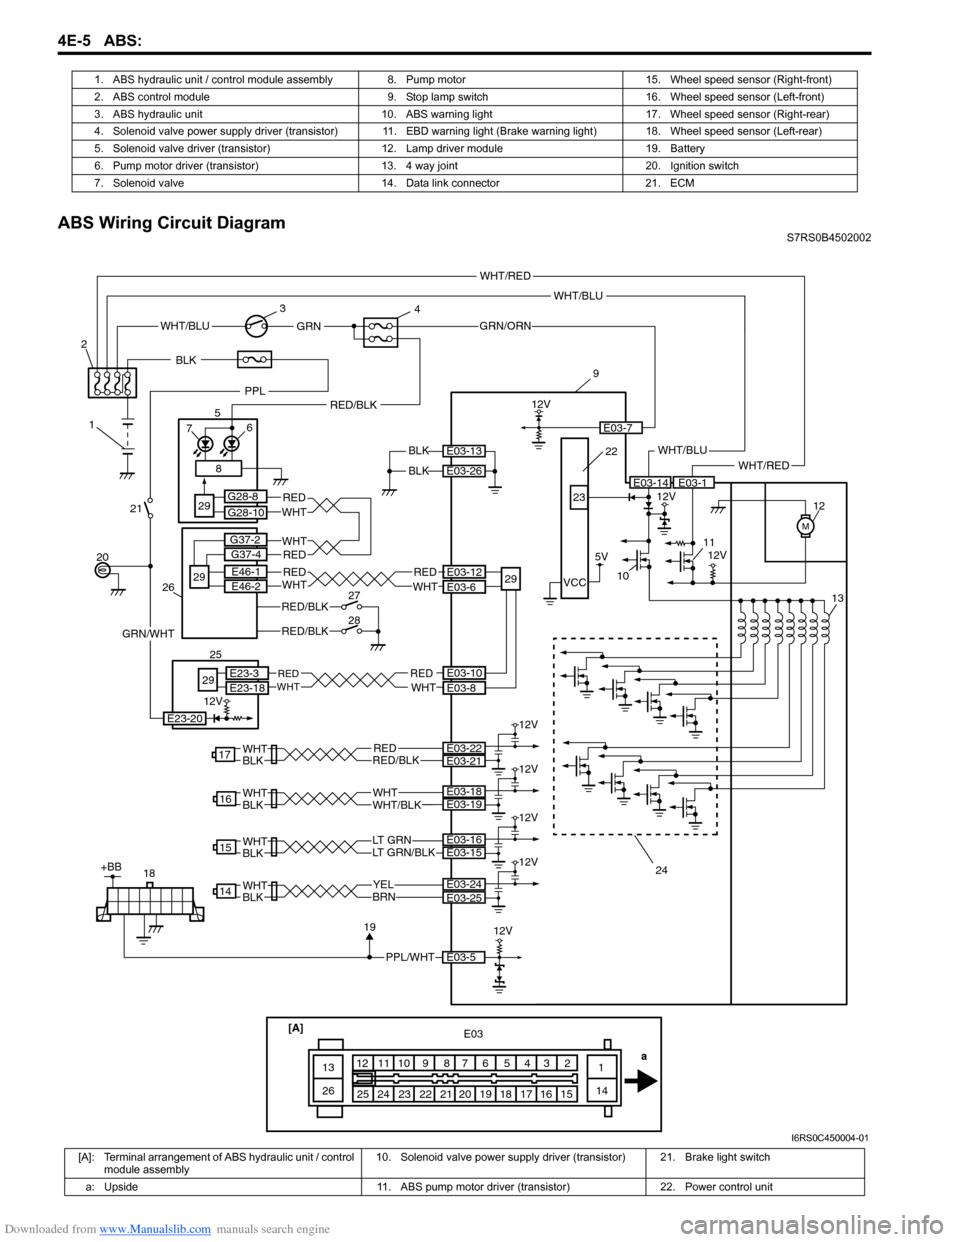 SUZUKI SWIFT 2006 2.G Service Workshop Manual Downloaded from www.Manualslib.com manuals search engine 4E-5 ABS: 
ABS Wiring Circuit DiagramS7RS0B4502002
1. ABS hydraulic unit / control module assembly 8.
Pump motor 15. Wheel speed sensor (Right-